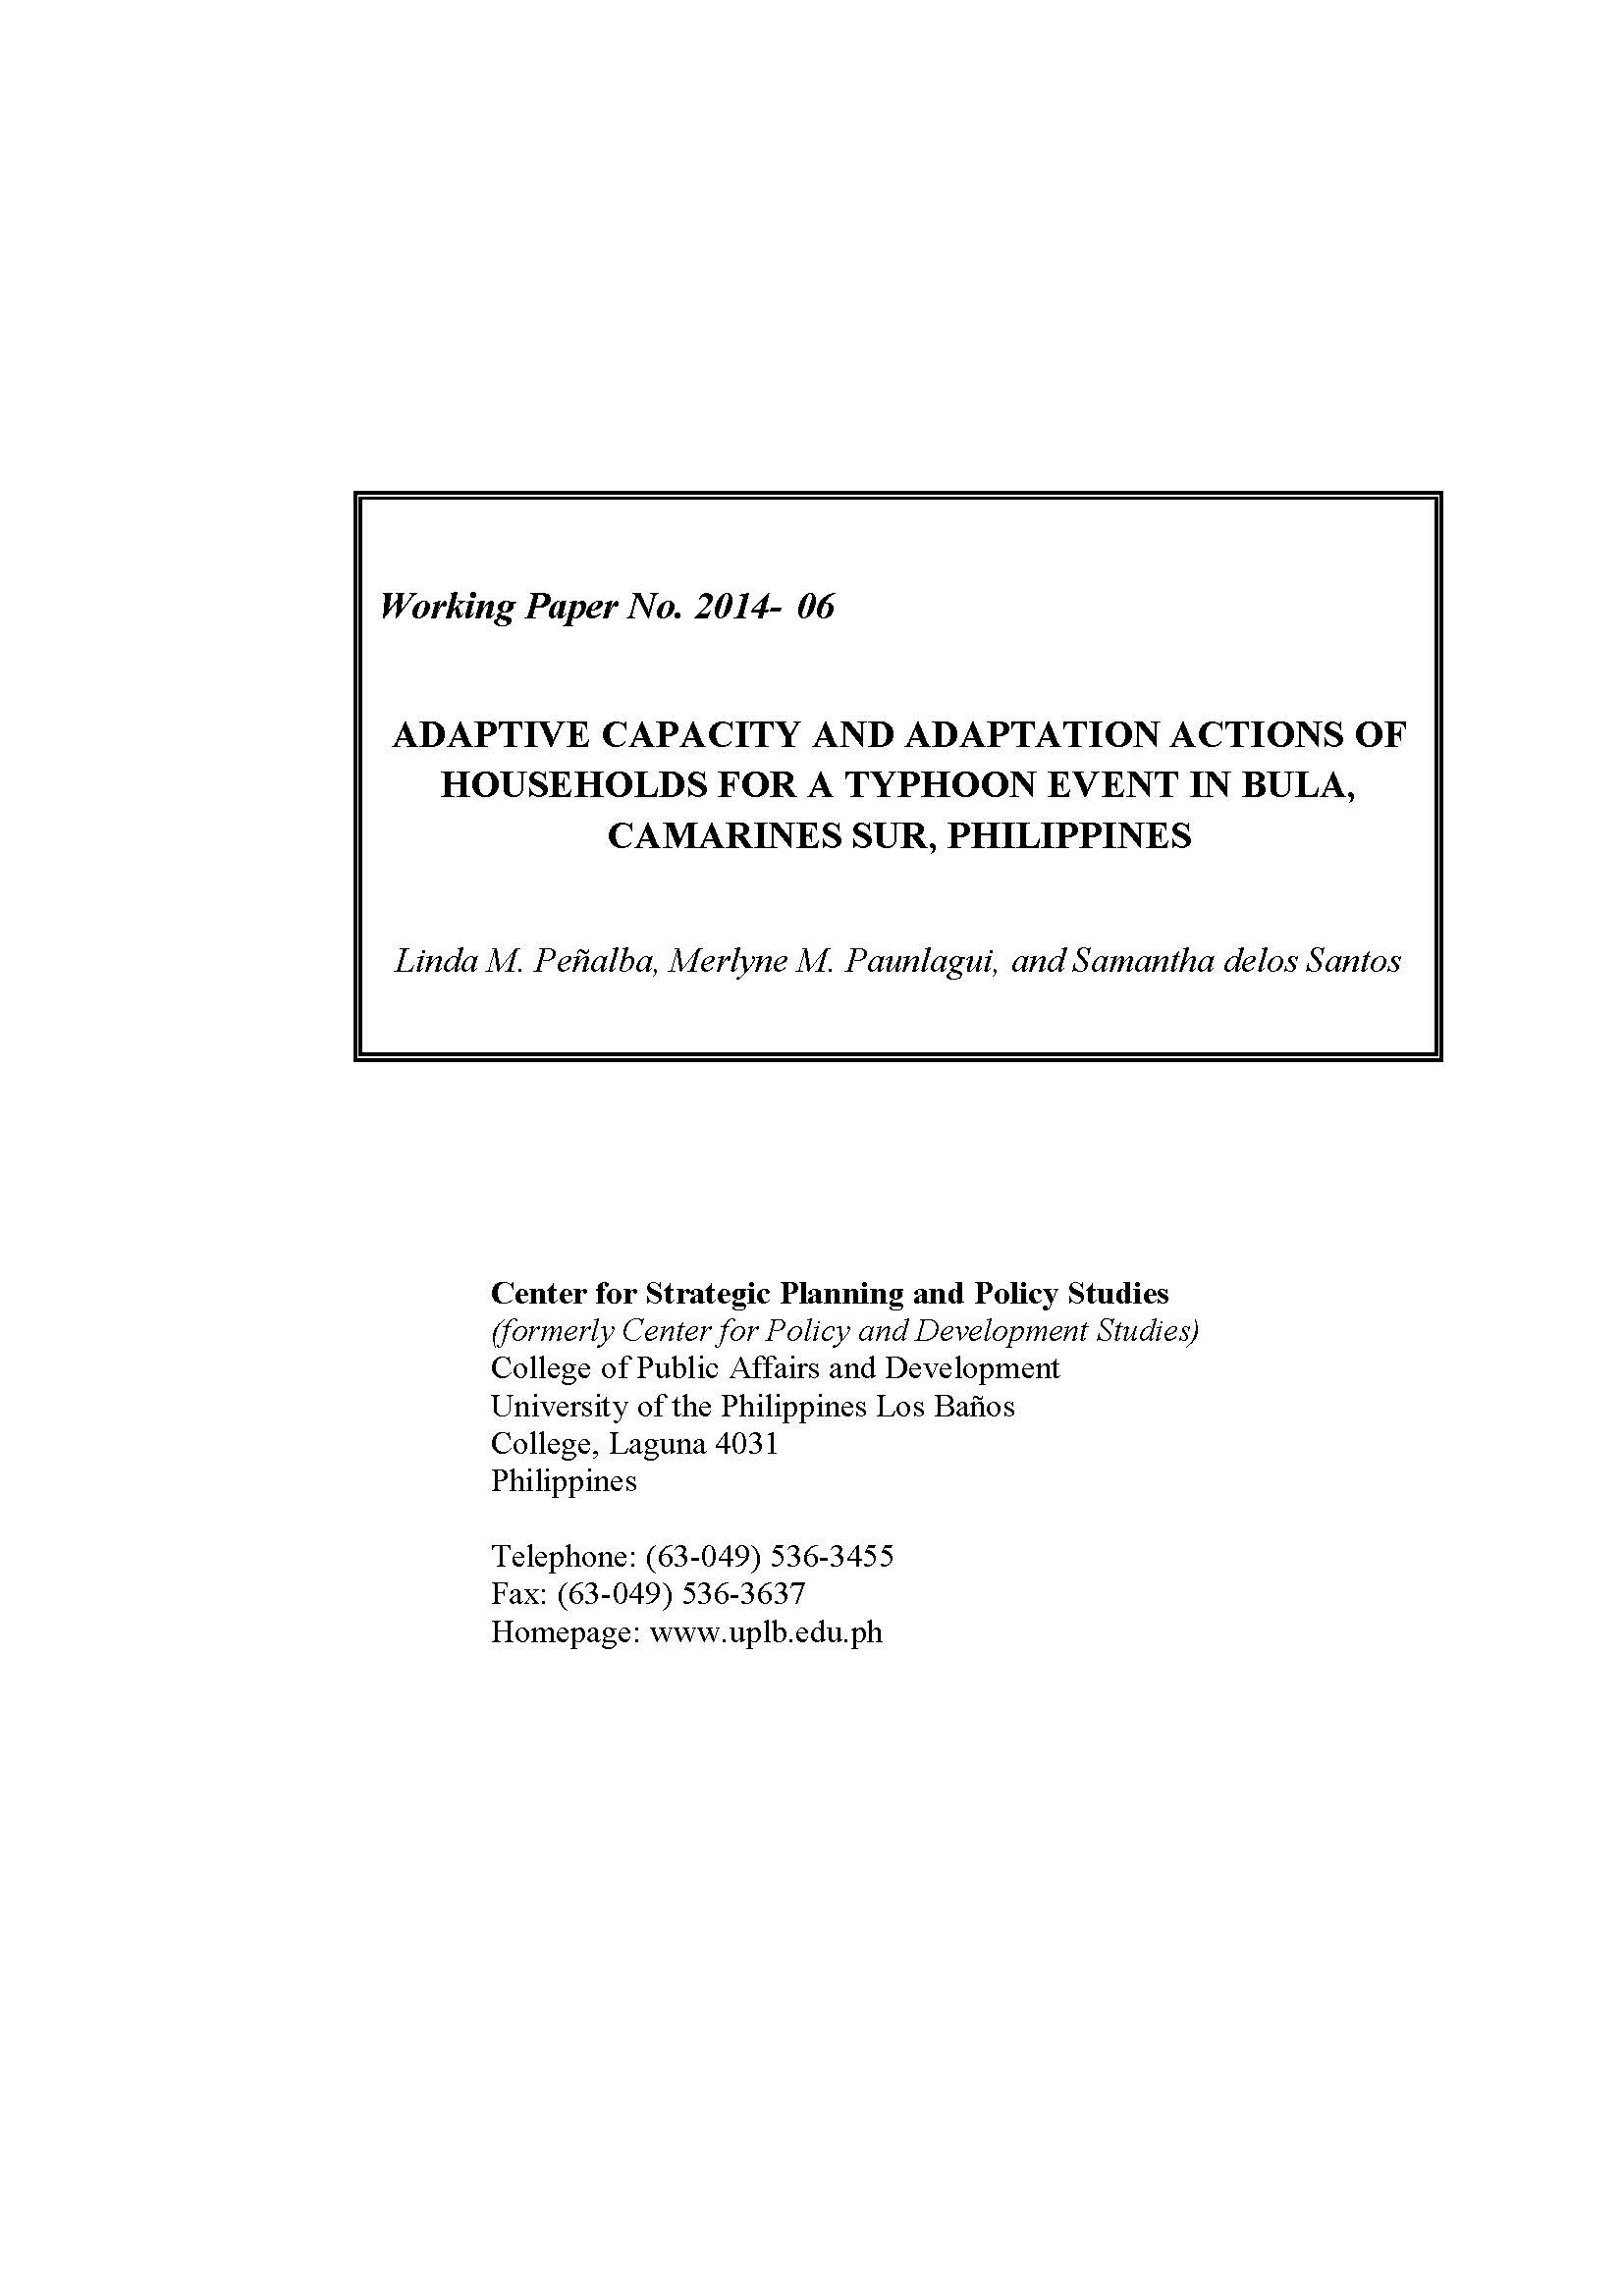 Adaptive Capacity and Adaptation Actions of Households for a Typhoon Event in Bula, Camarines Sur, Philippines